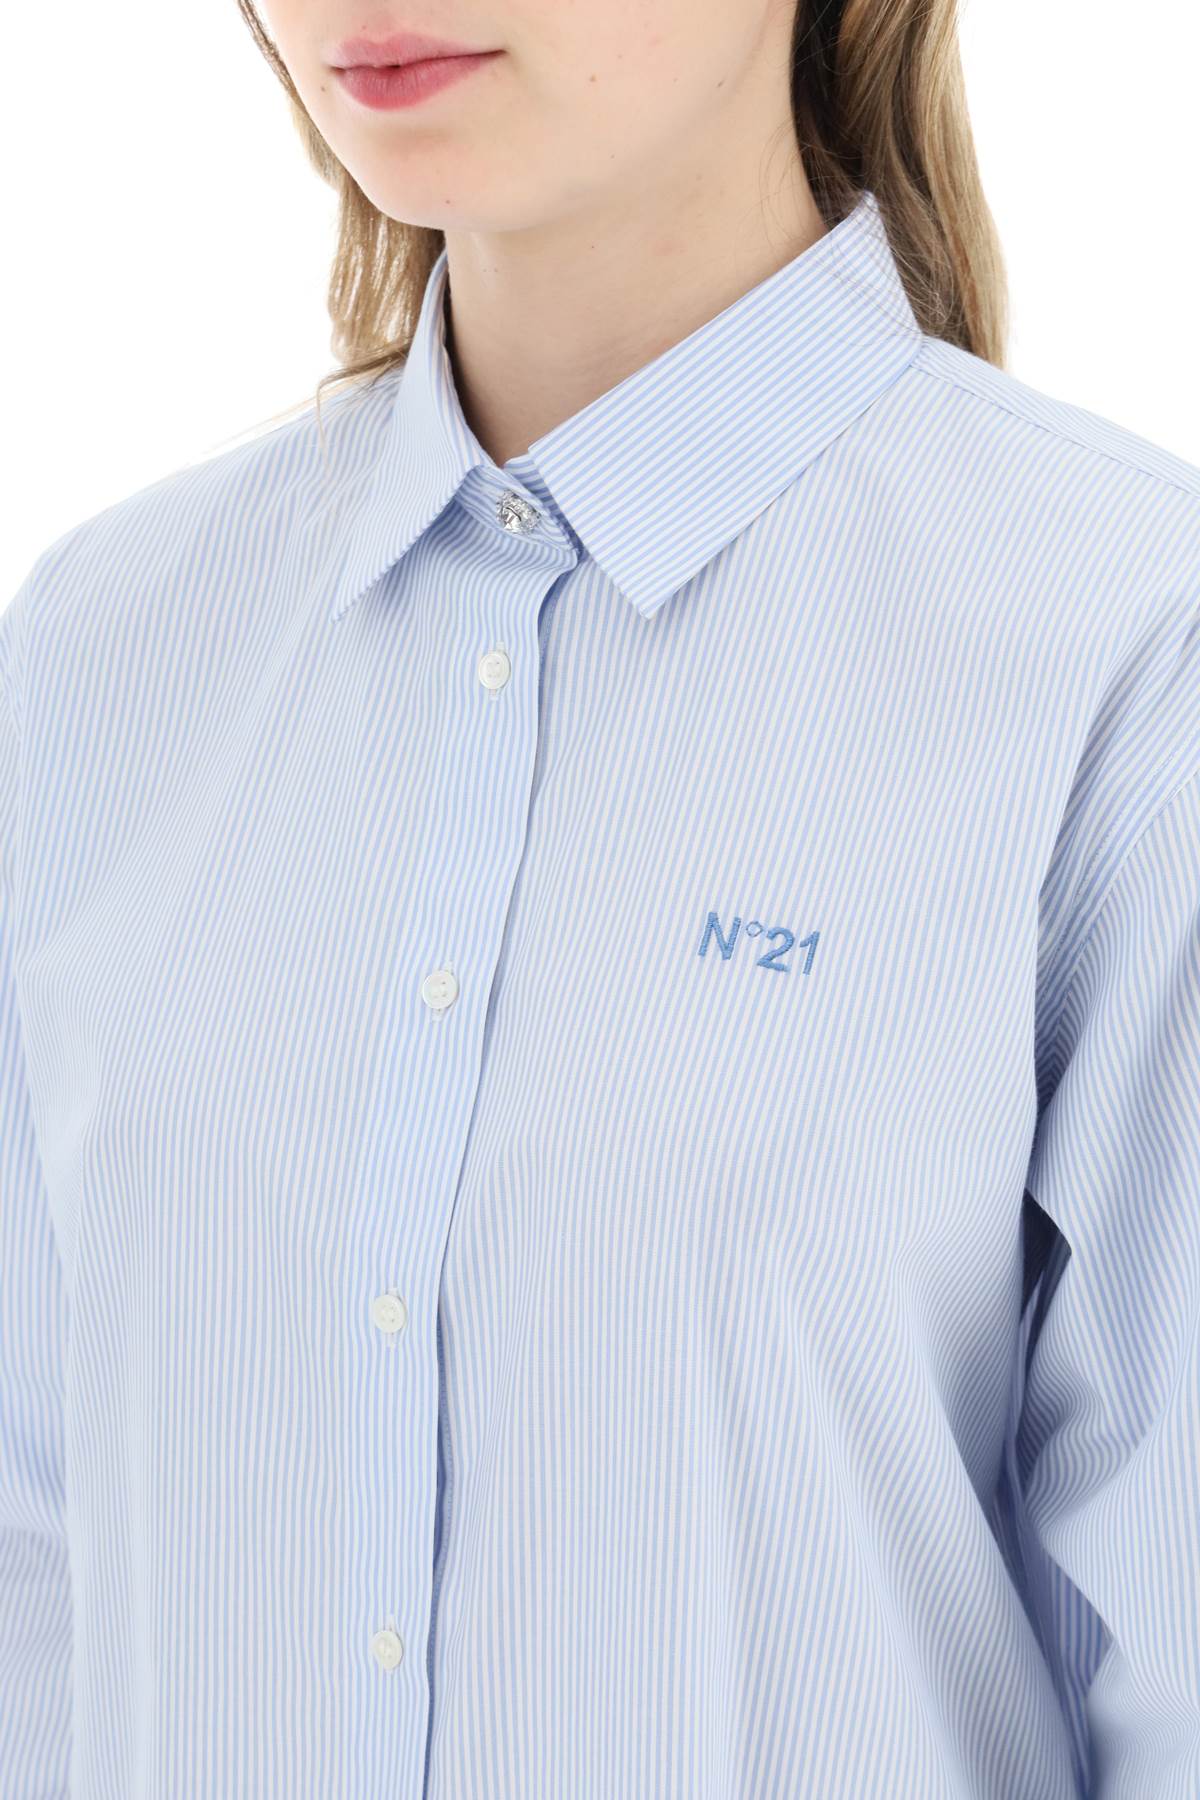 Shop N°21 Striped Shirt With Jewel Buttons In Rigato Bianco Azzurro (white)